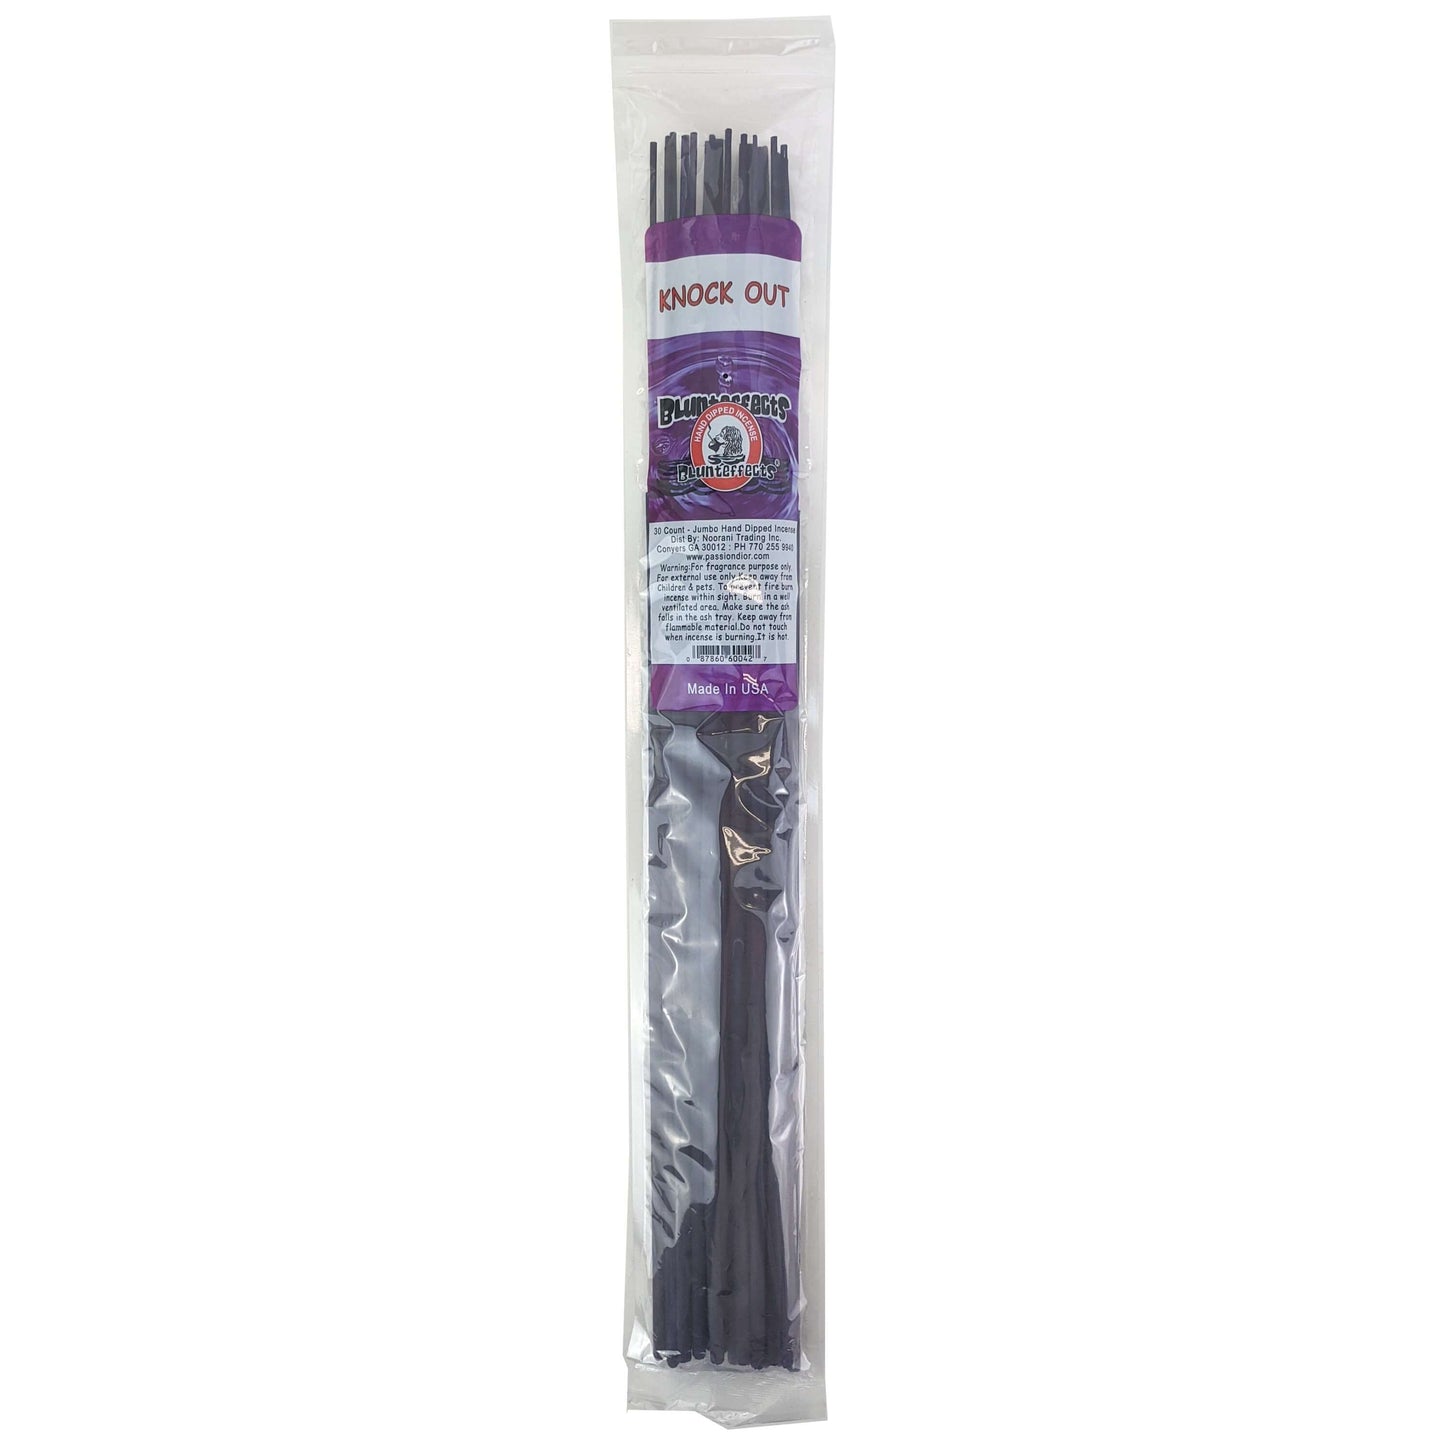 Knock Out Scent, 19" BluntEffects Jumbo Incense